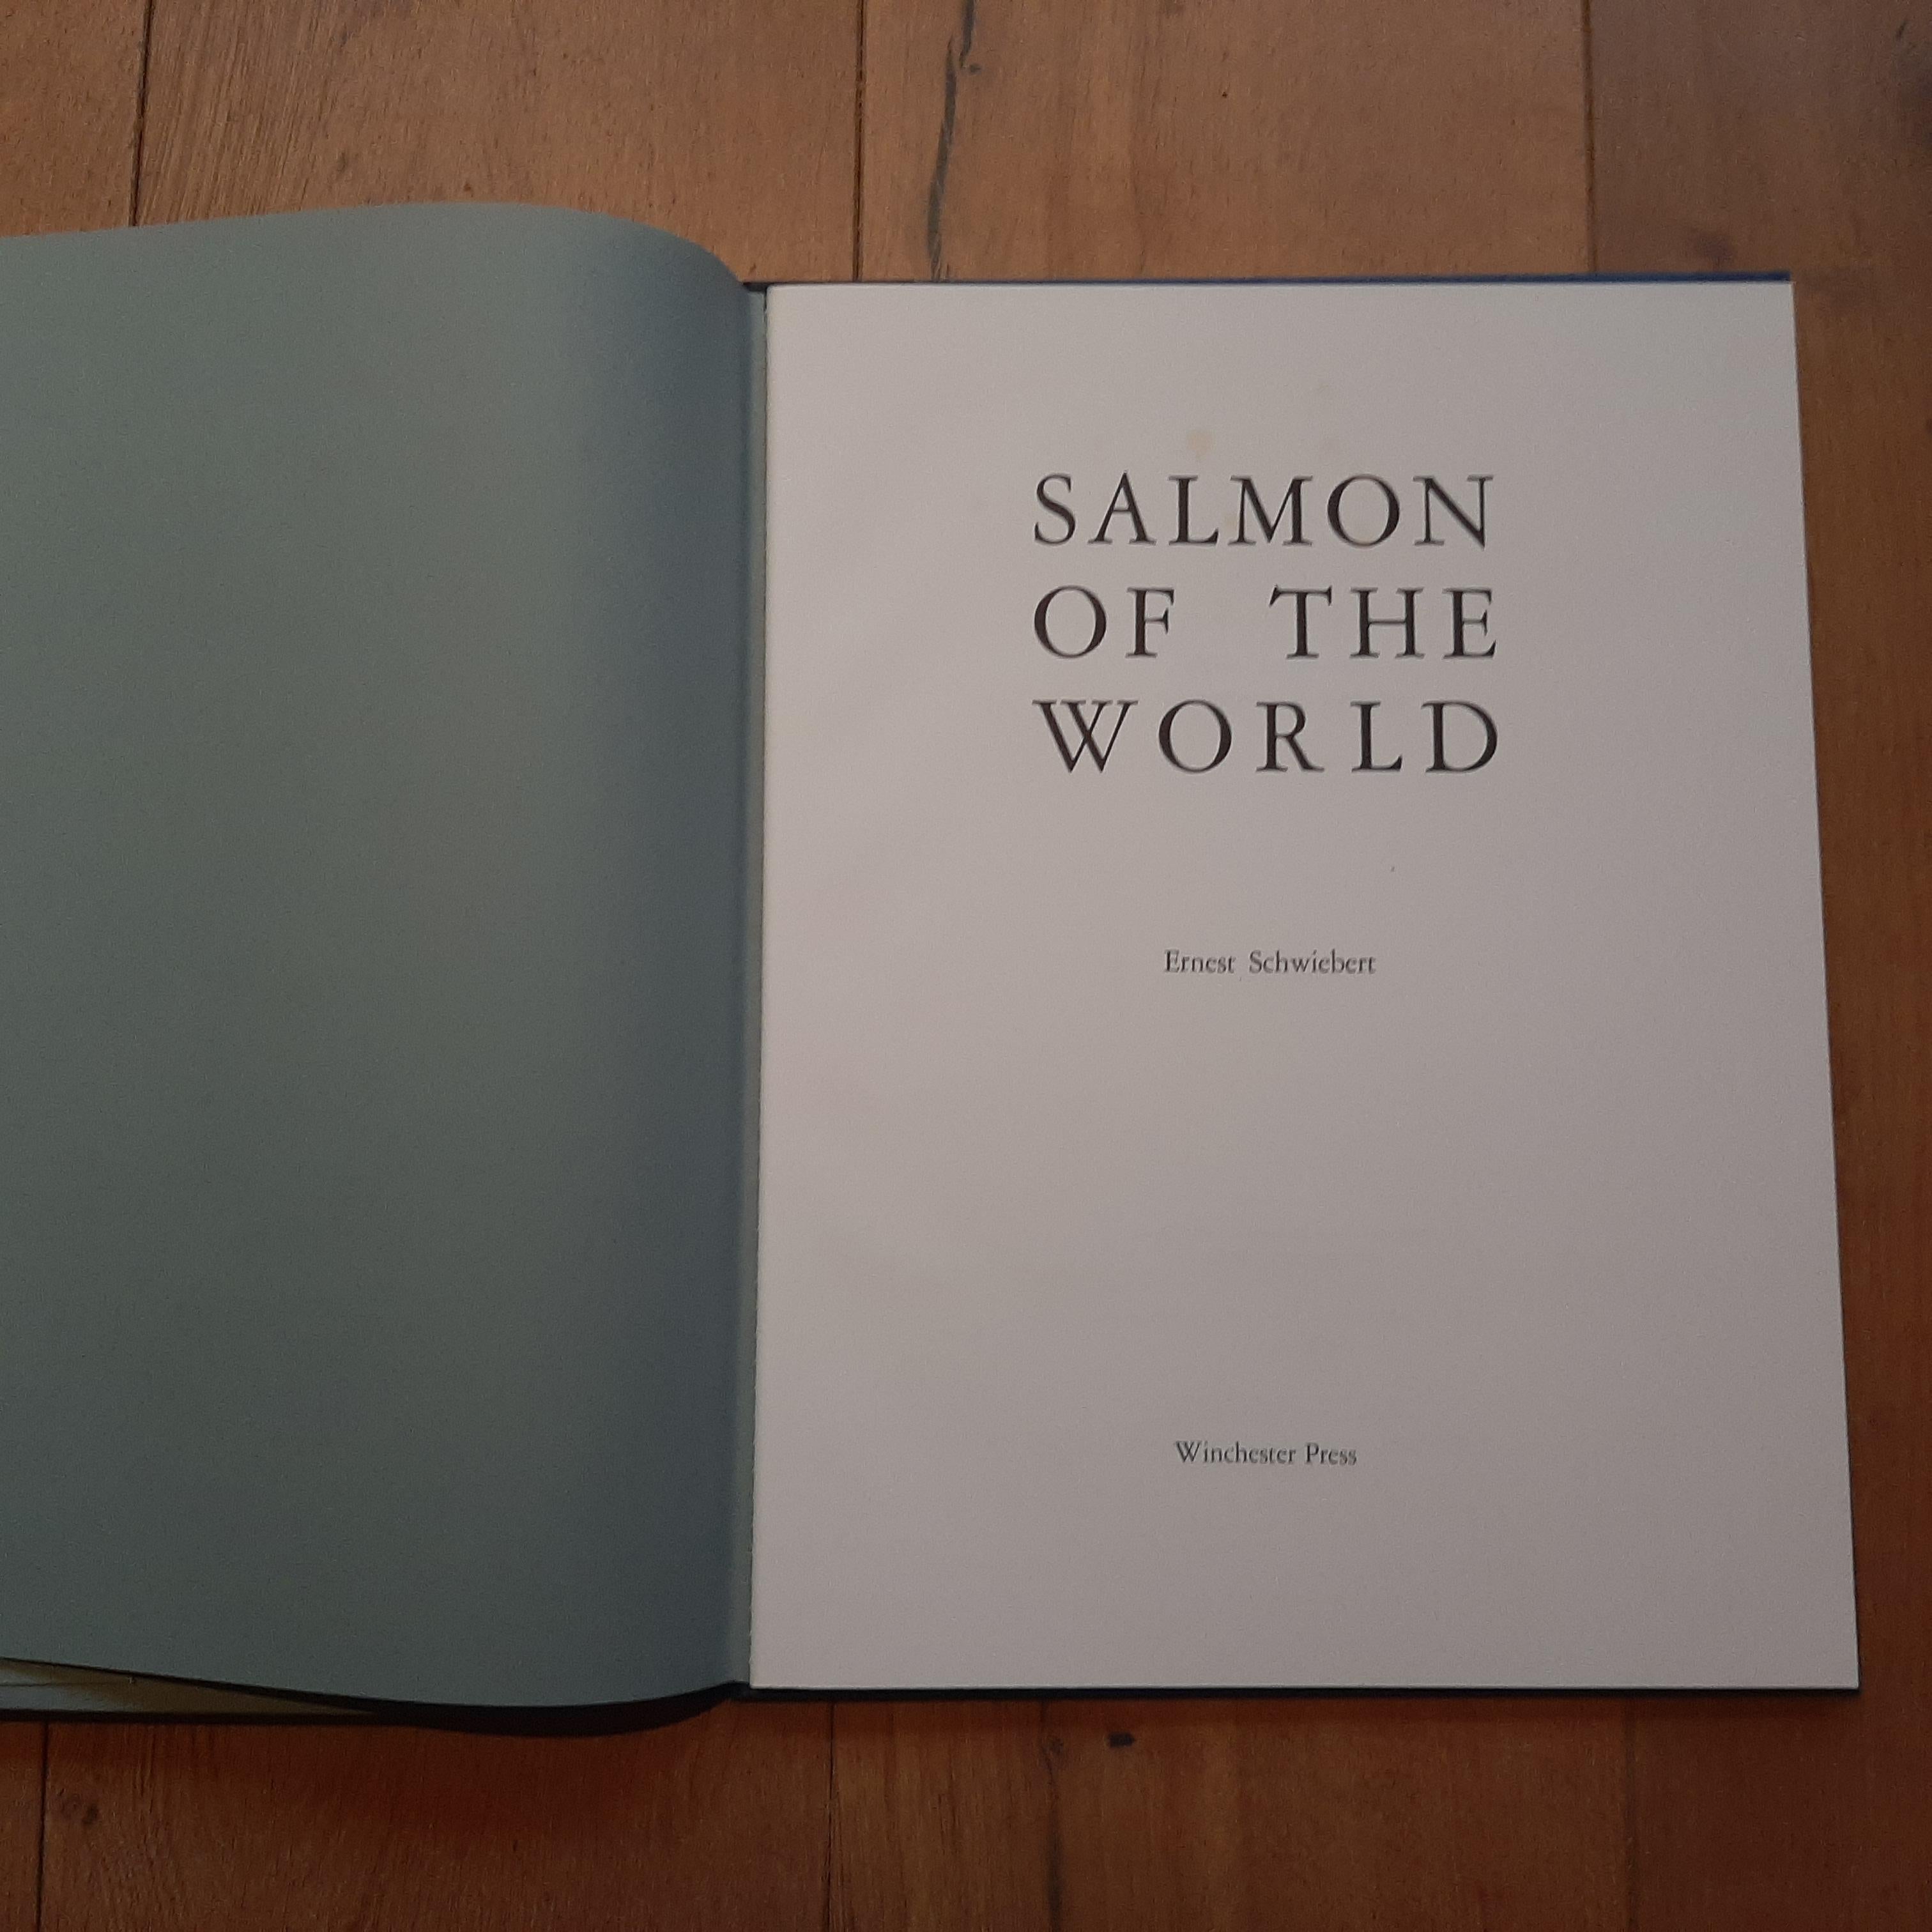 'Salmon of the World' by Ernest Schwiebert. A portfolio of 30 color plates on the left side, in folding paper chemise. Text on the right, in the form of a 63 page book. Hardcover with gold lettering on the spine with original slipcase. Limited